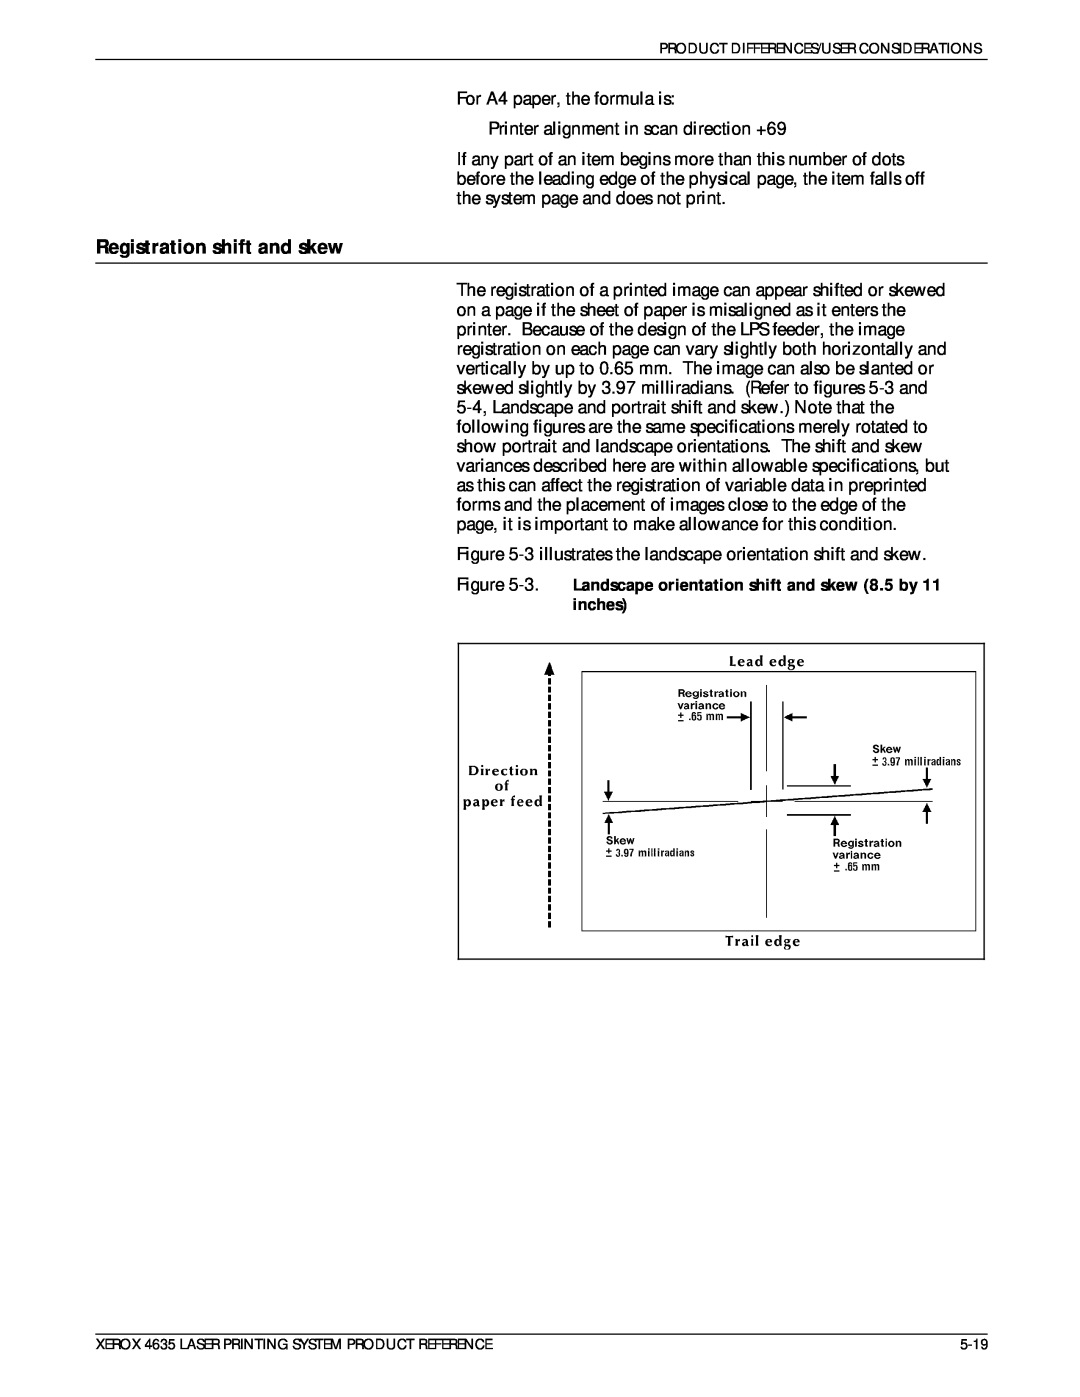 Xerox 721P83071 manual Registration shift and skew, 3. Landscape orientation shift and skew 8.5 by 11 inches 